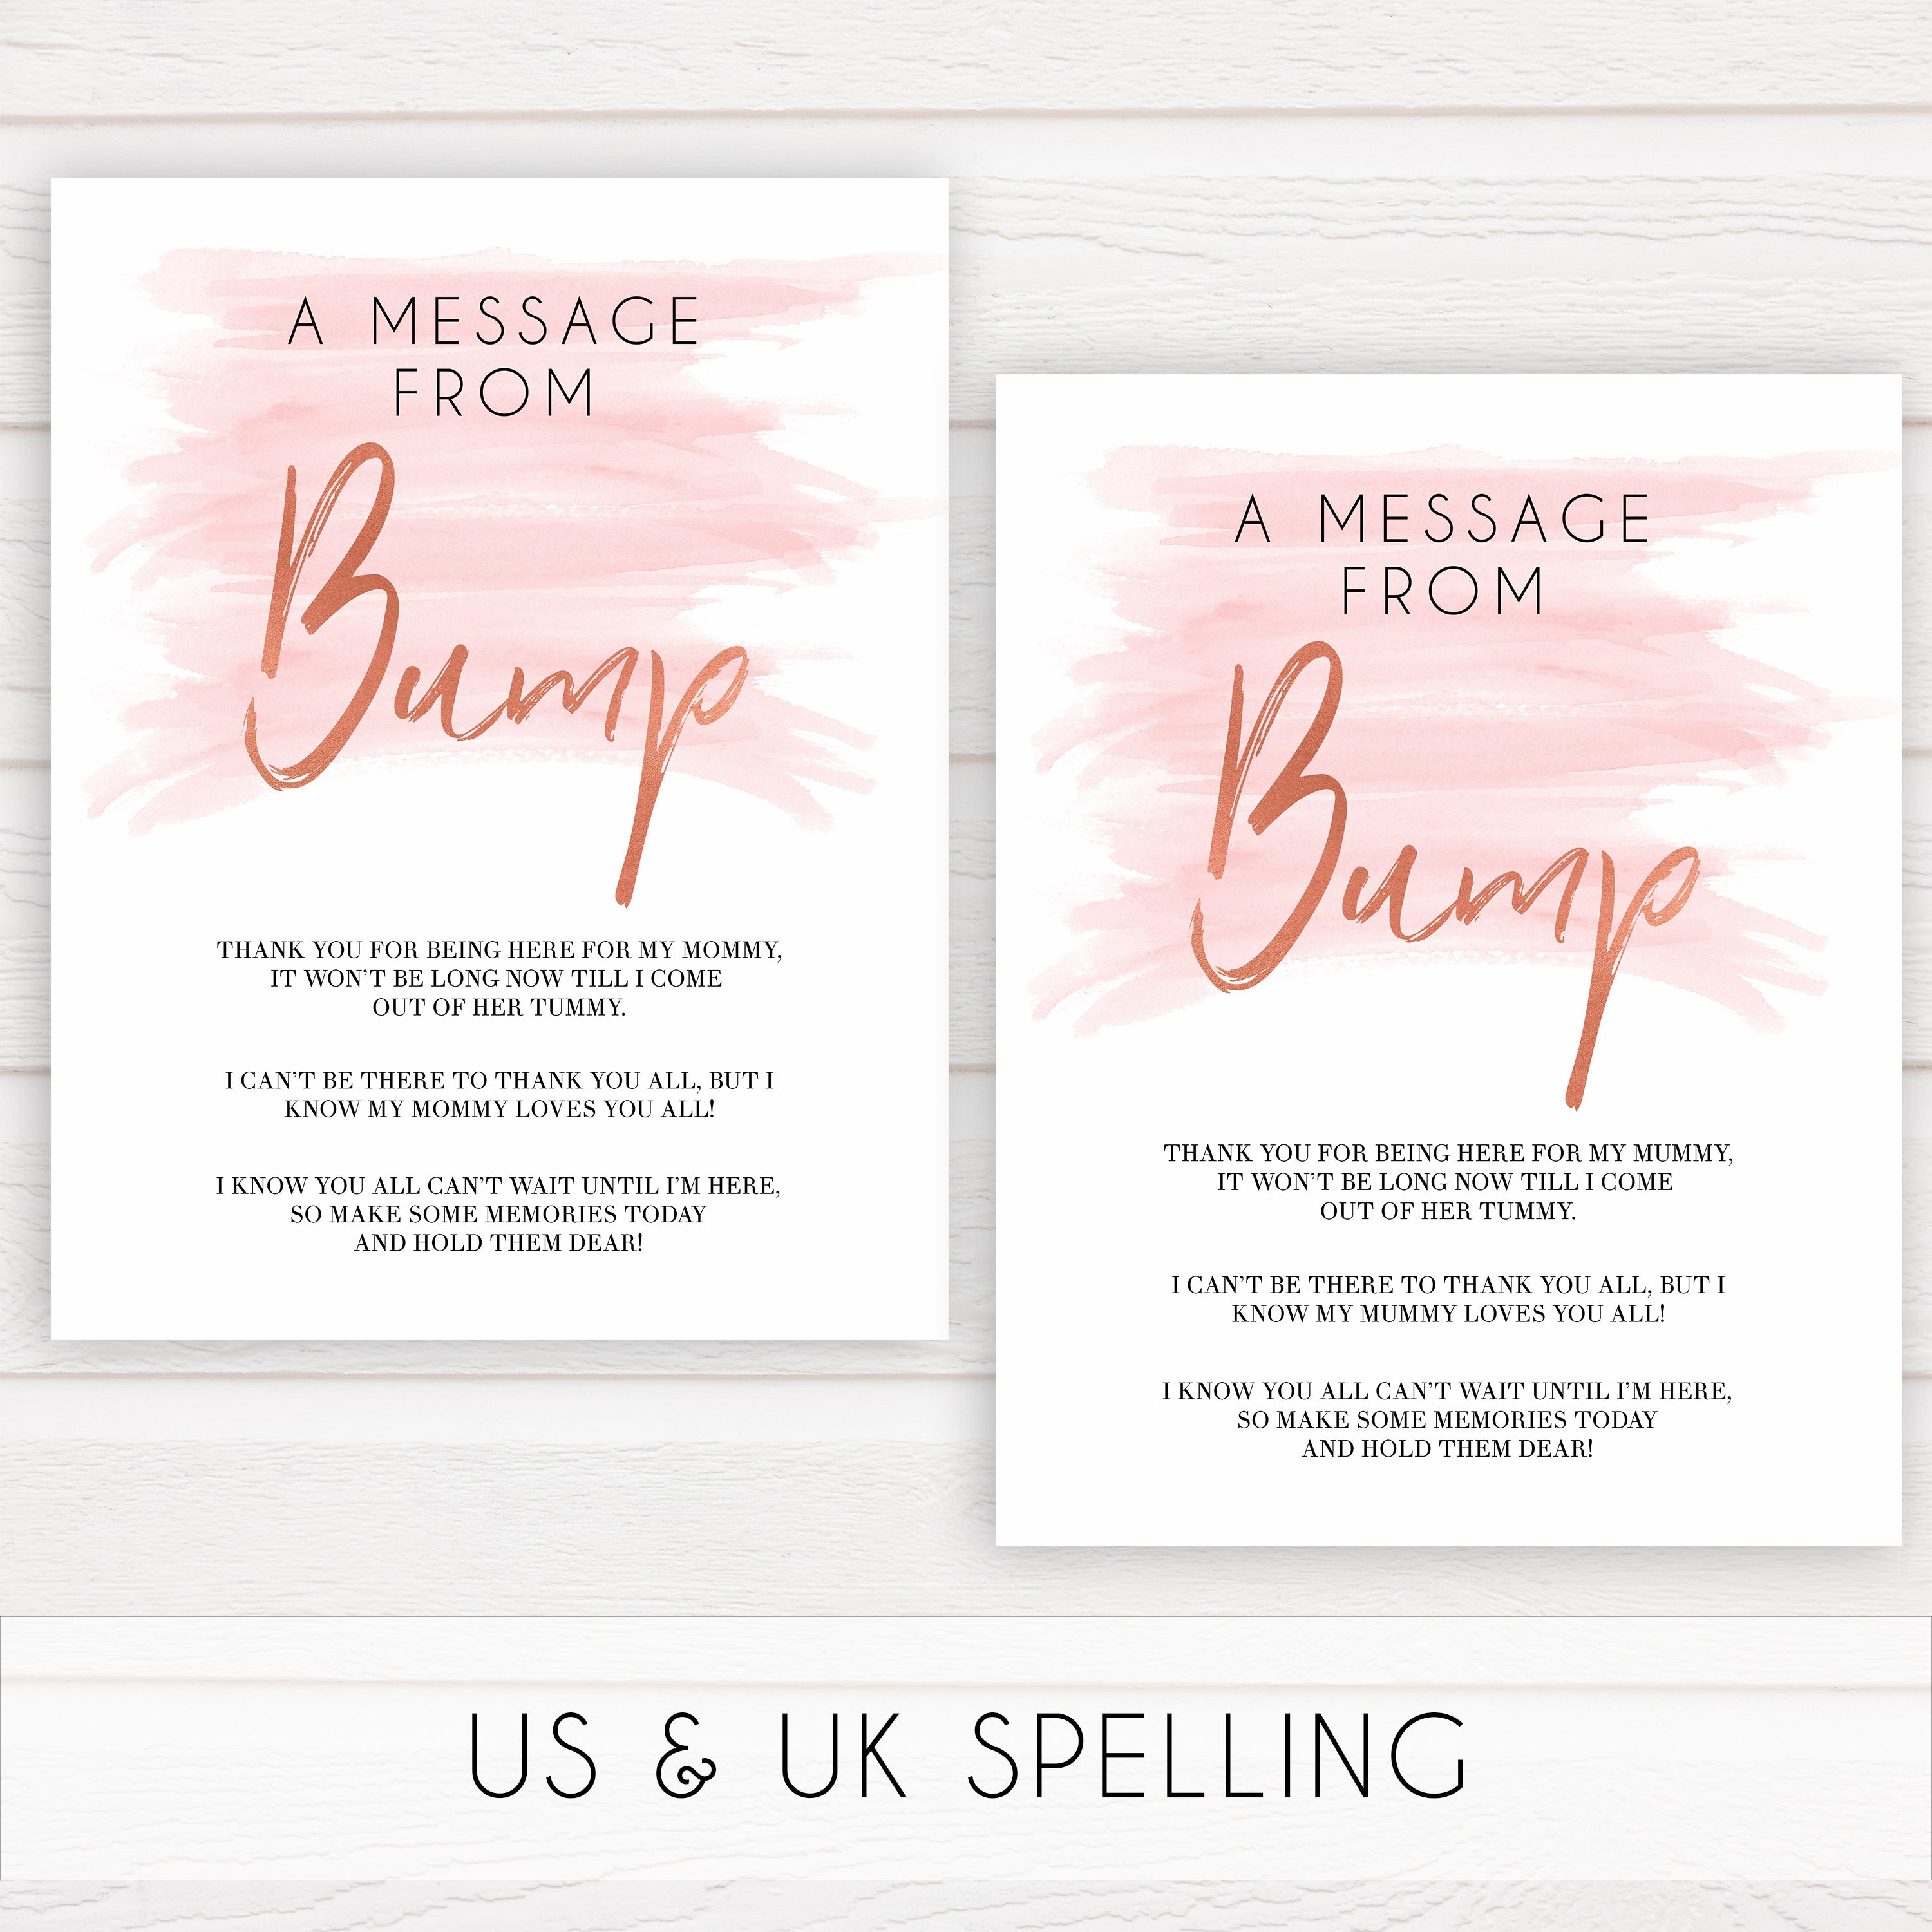 Message from bump pink swash baby shower, printable baby shower games, baby shower games, fun baby shower games, popular baby shower games